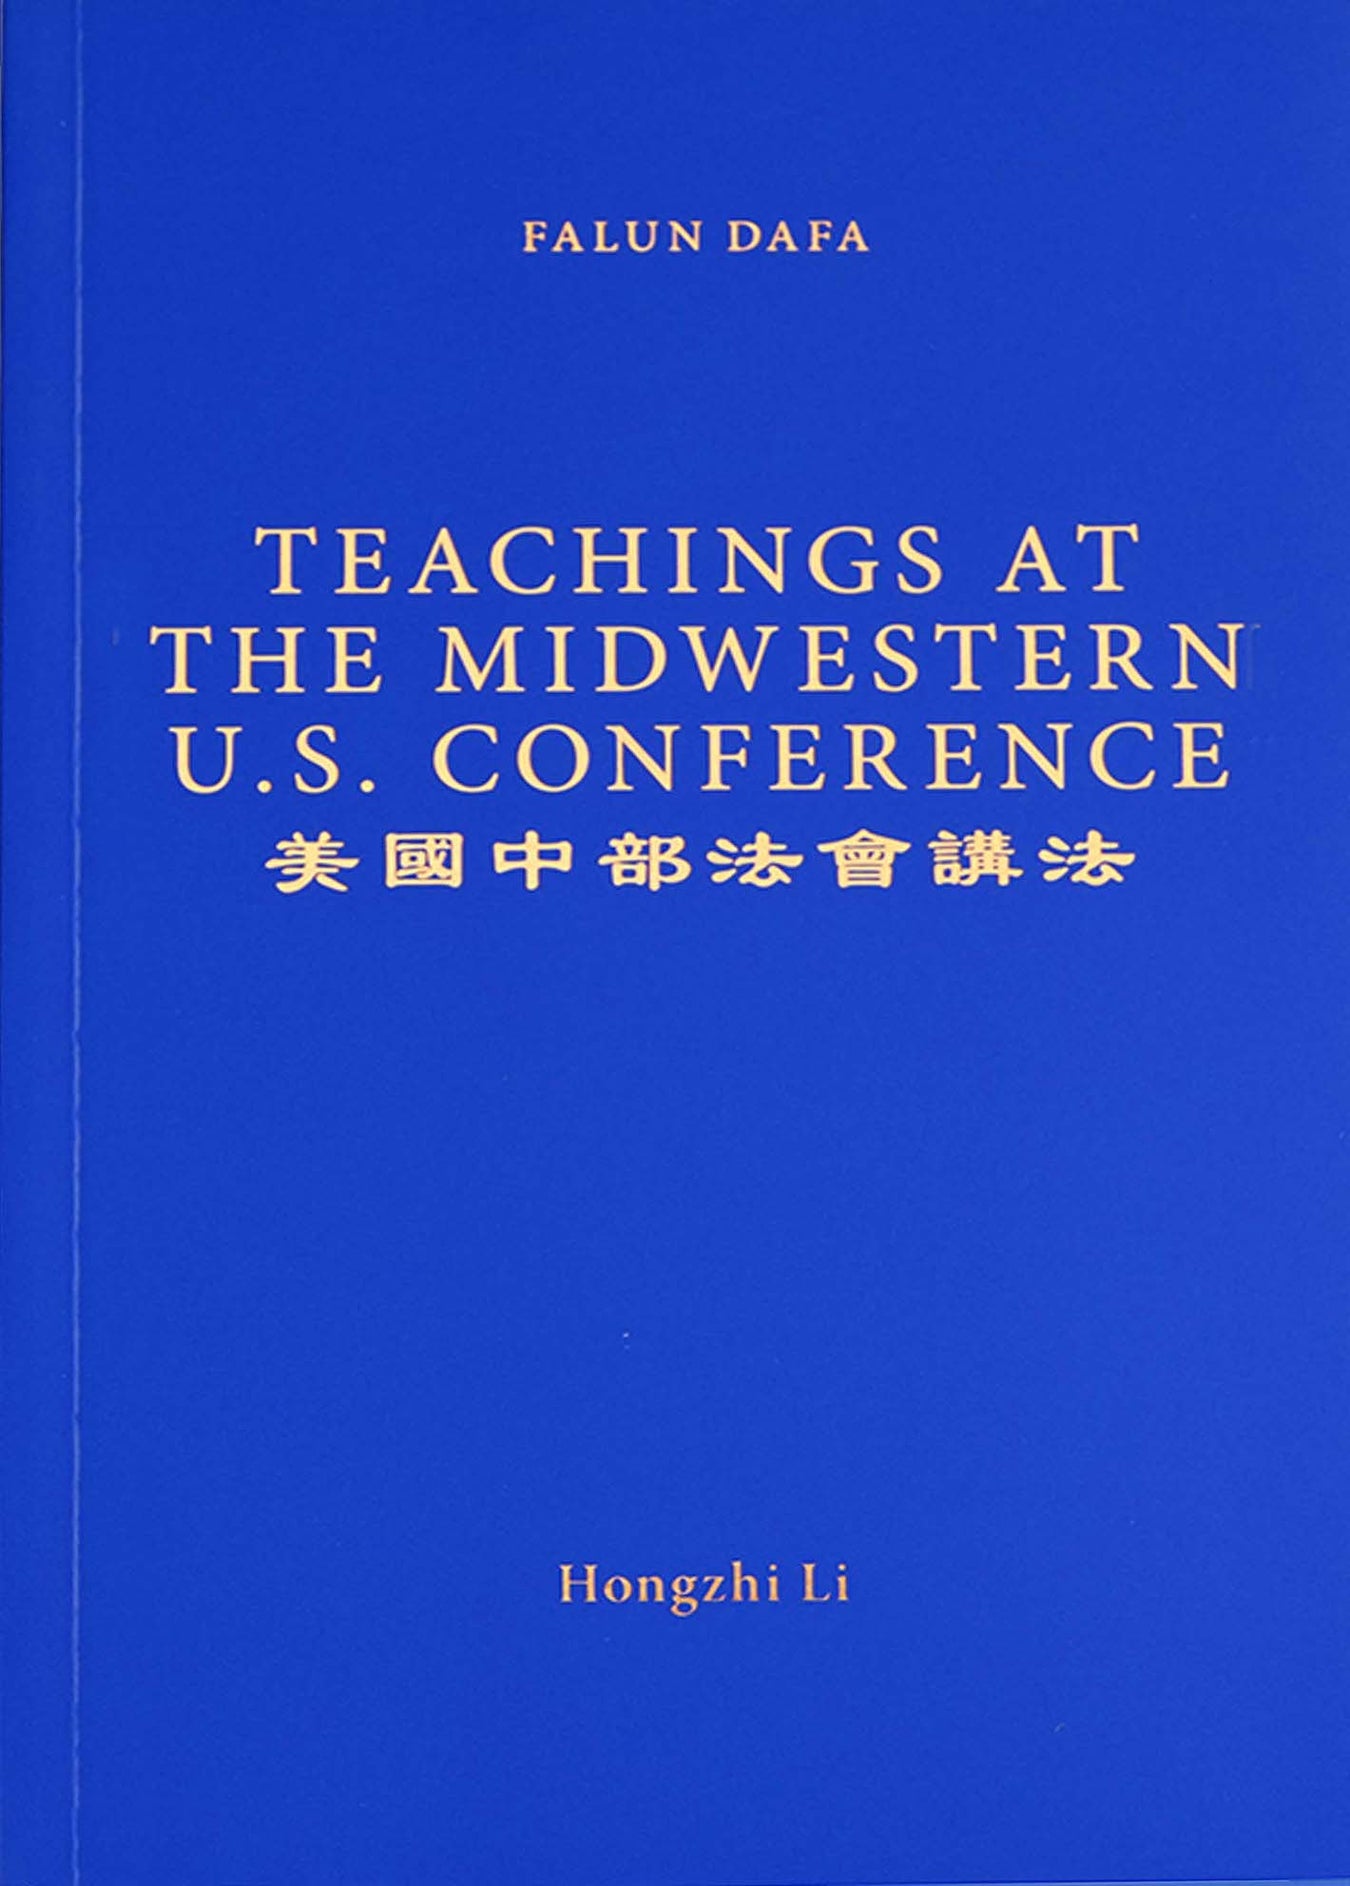 Teachings At The Midwestern U.S. Conference